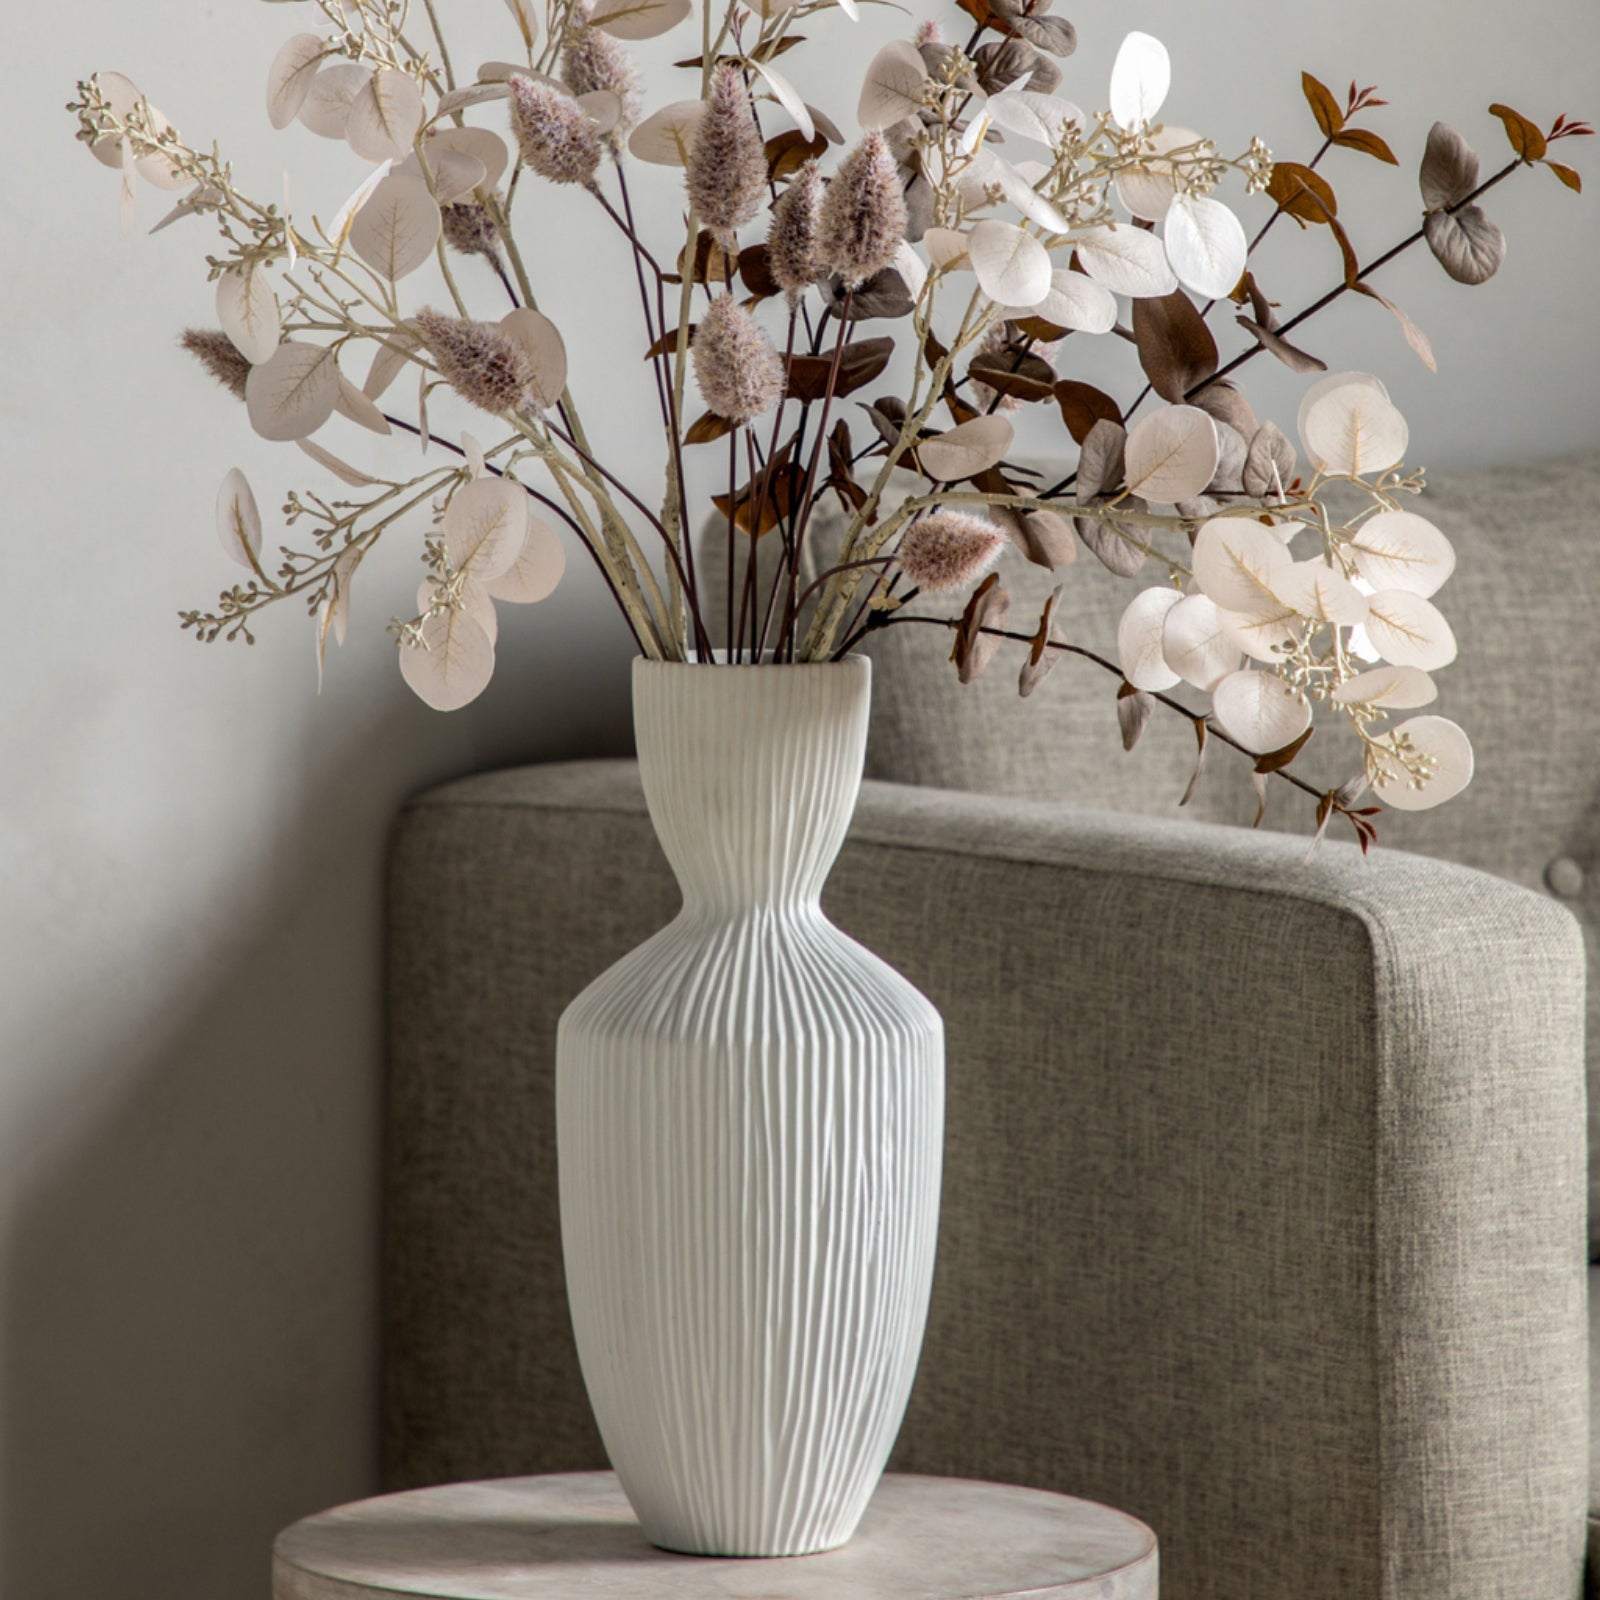 Textured Cream Shaped Vase - The Farthing